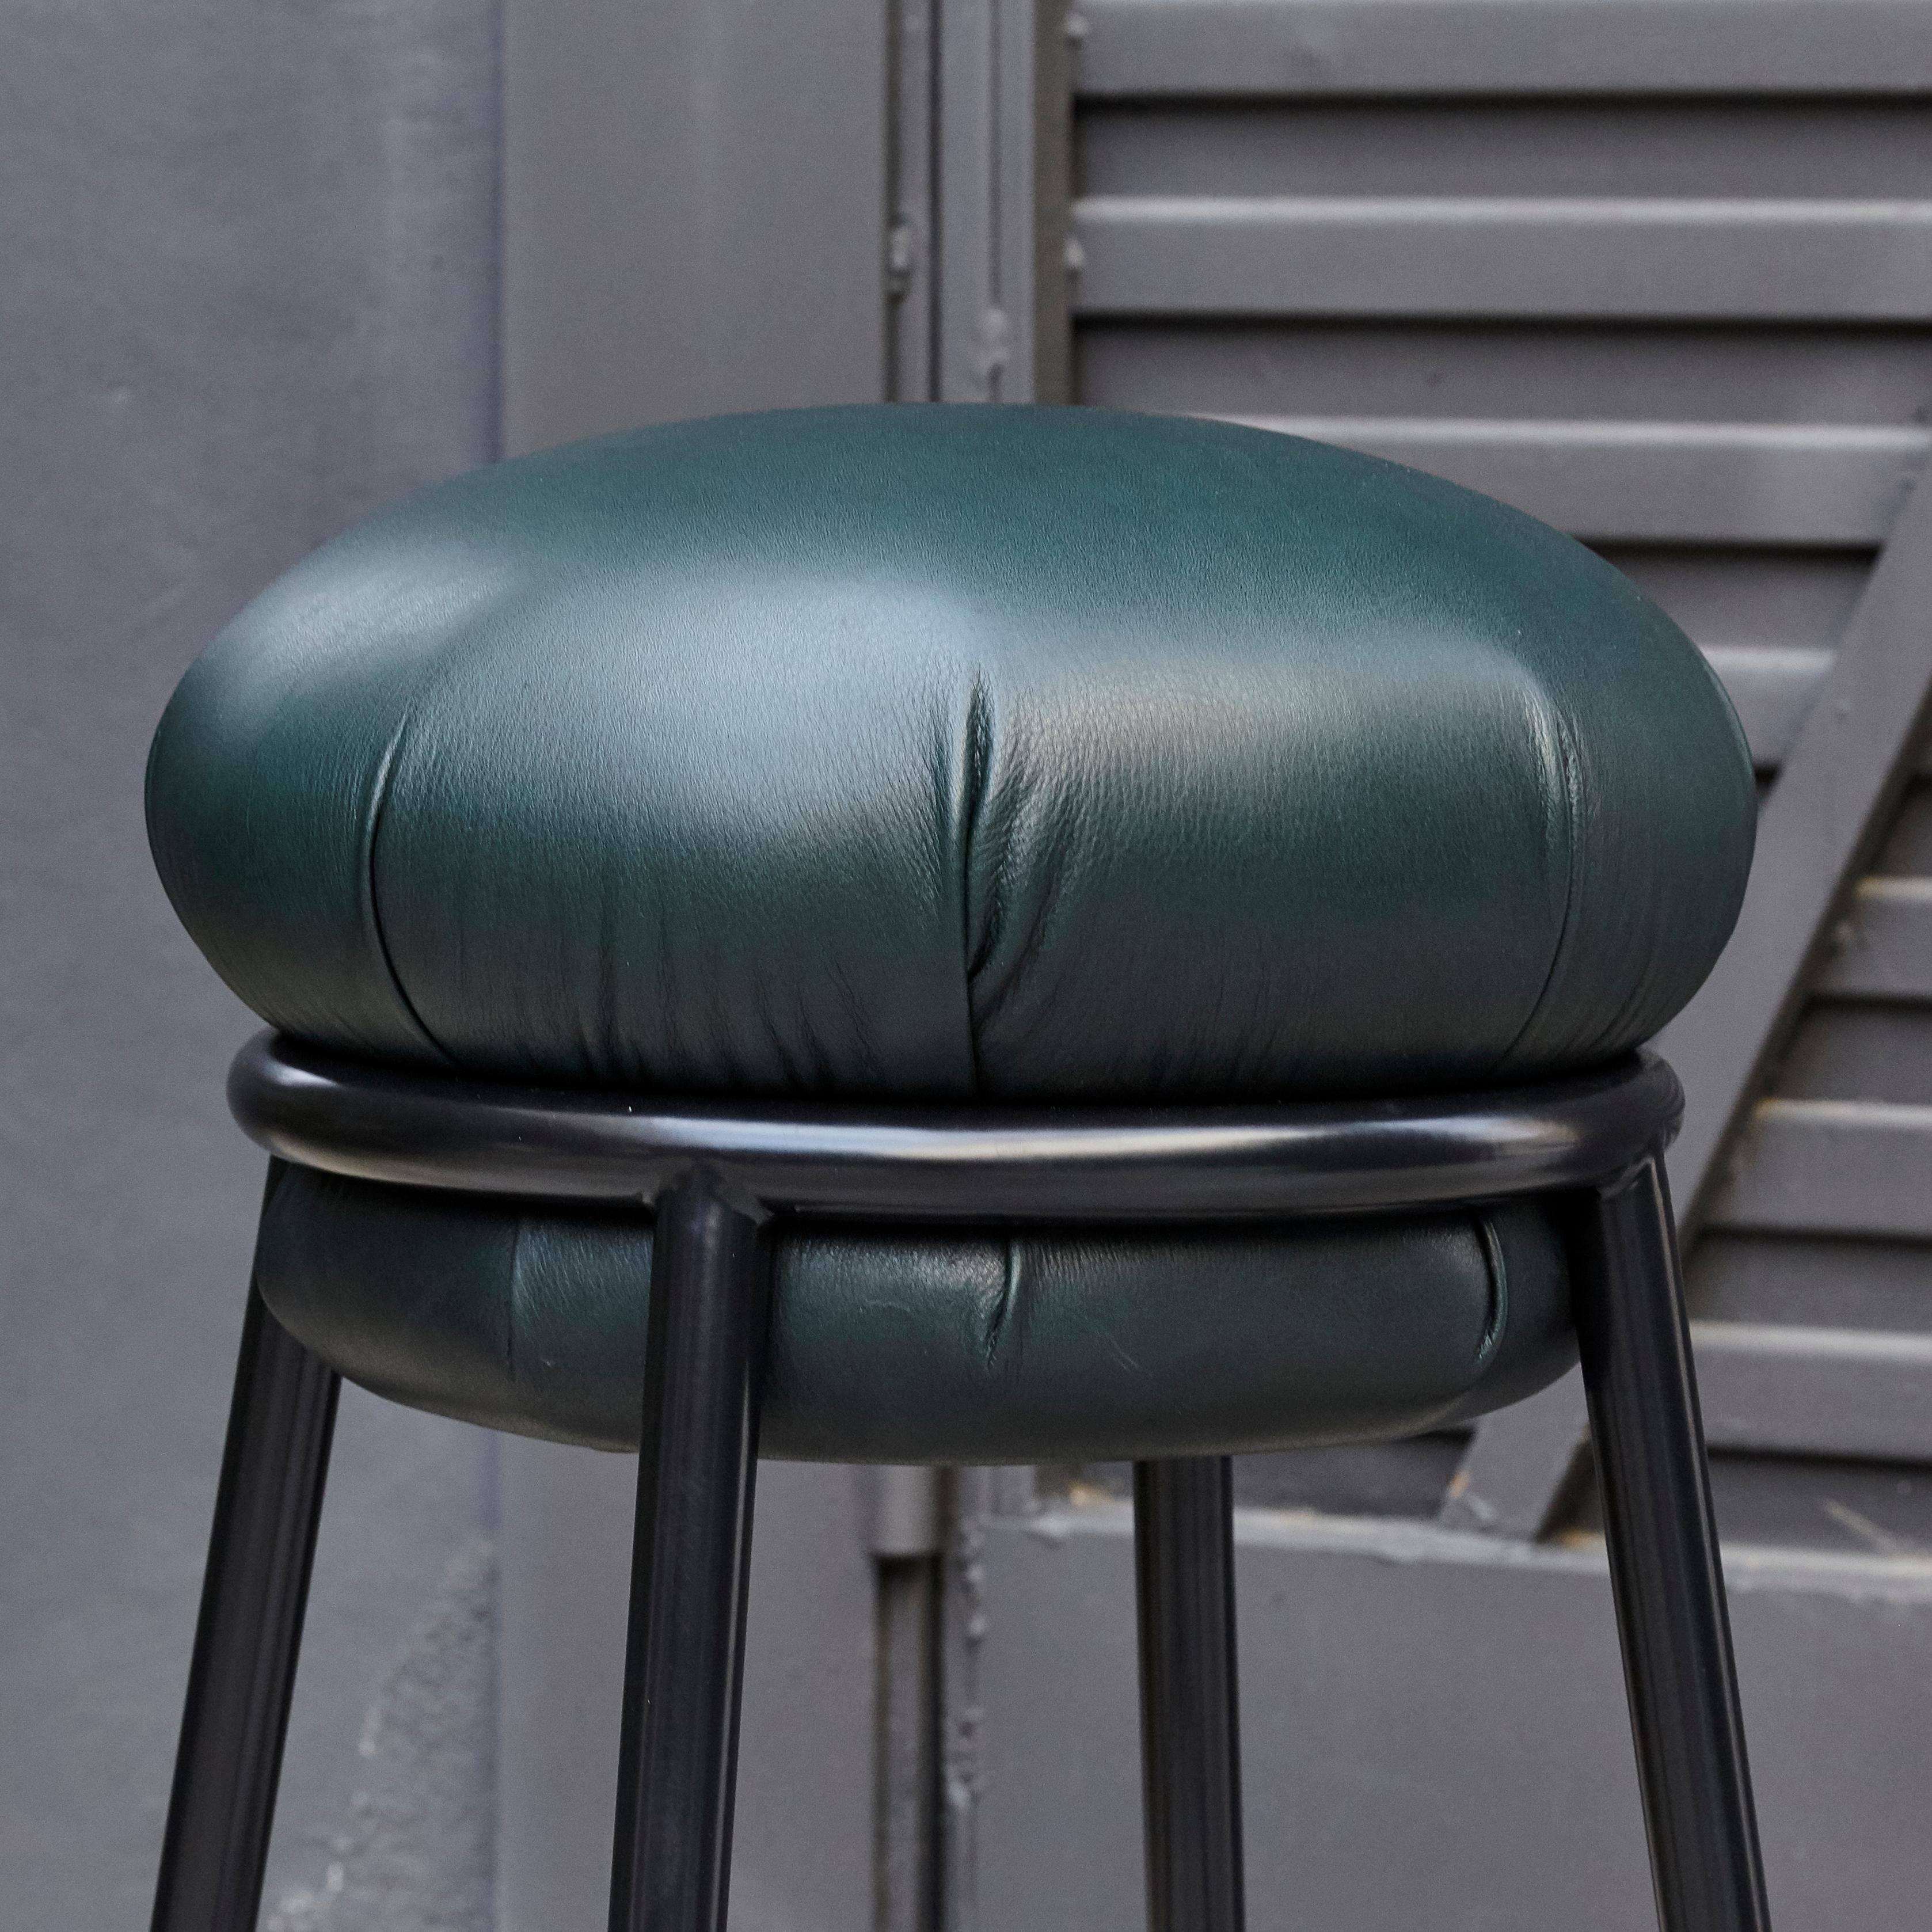 Spanish Stephen Burks Grasso Contemporary Green Leather, Black Lacquered Metal Stool